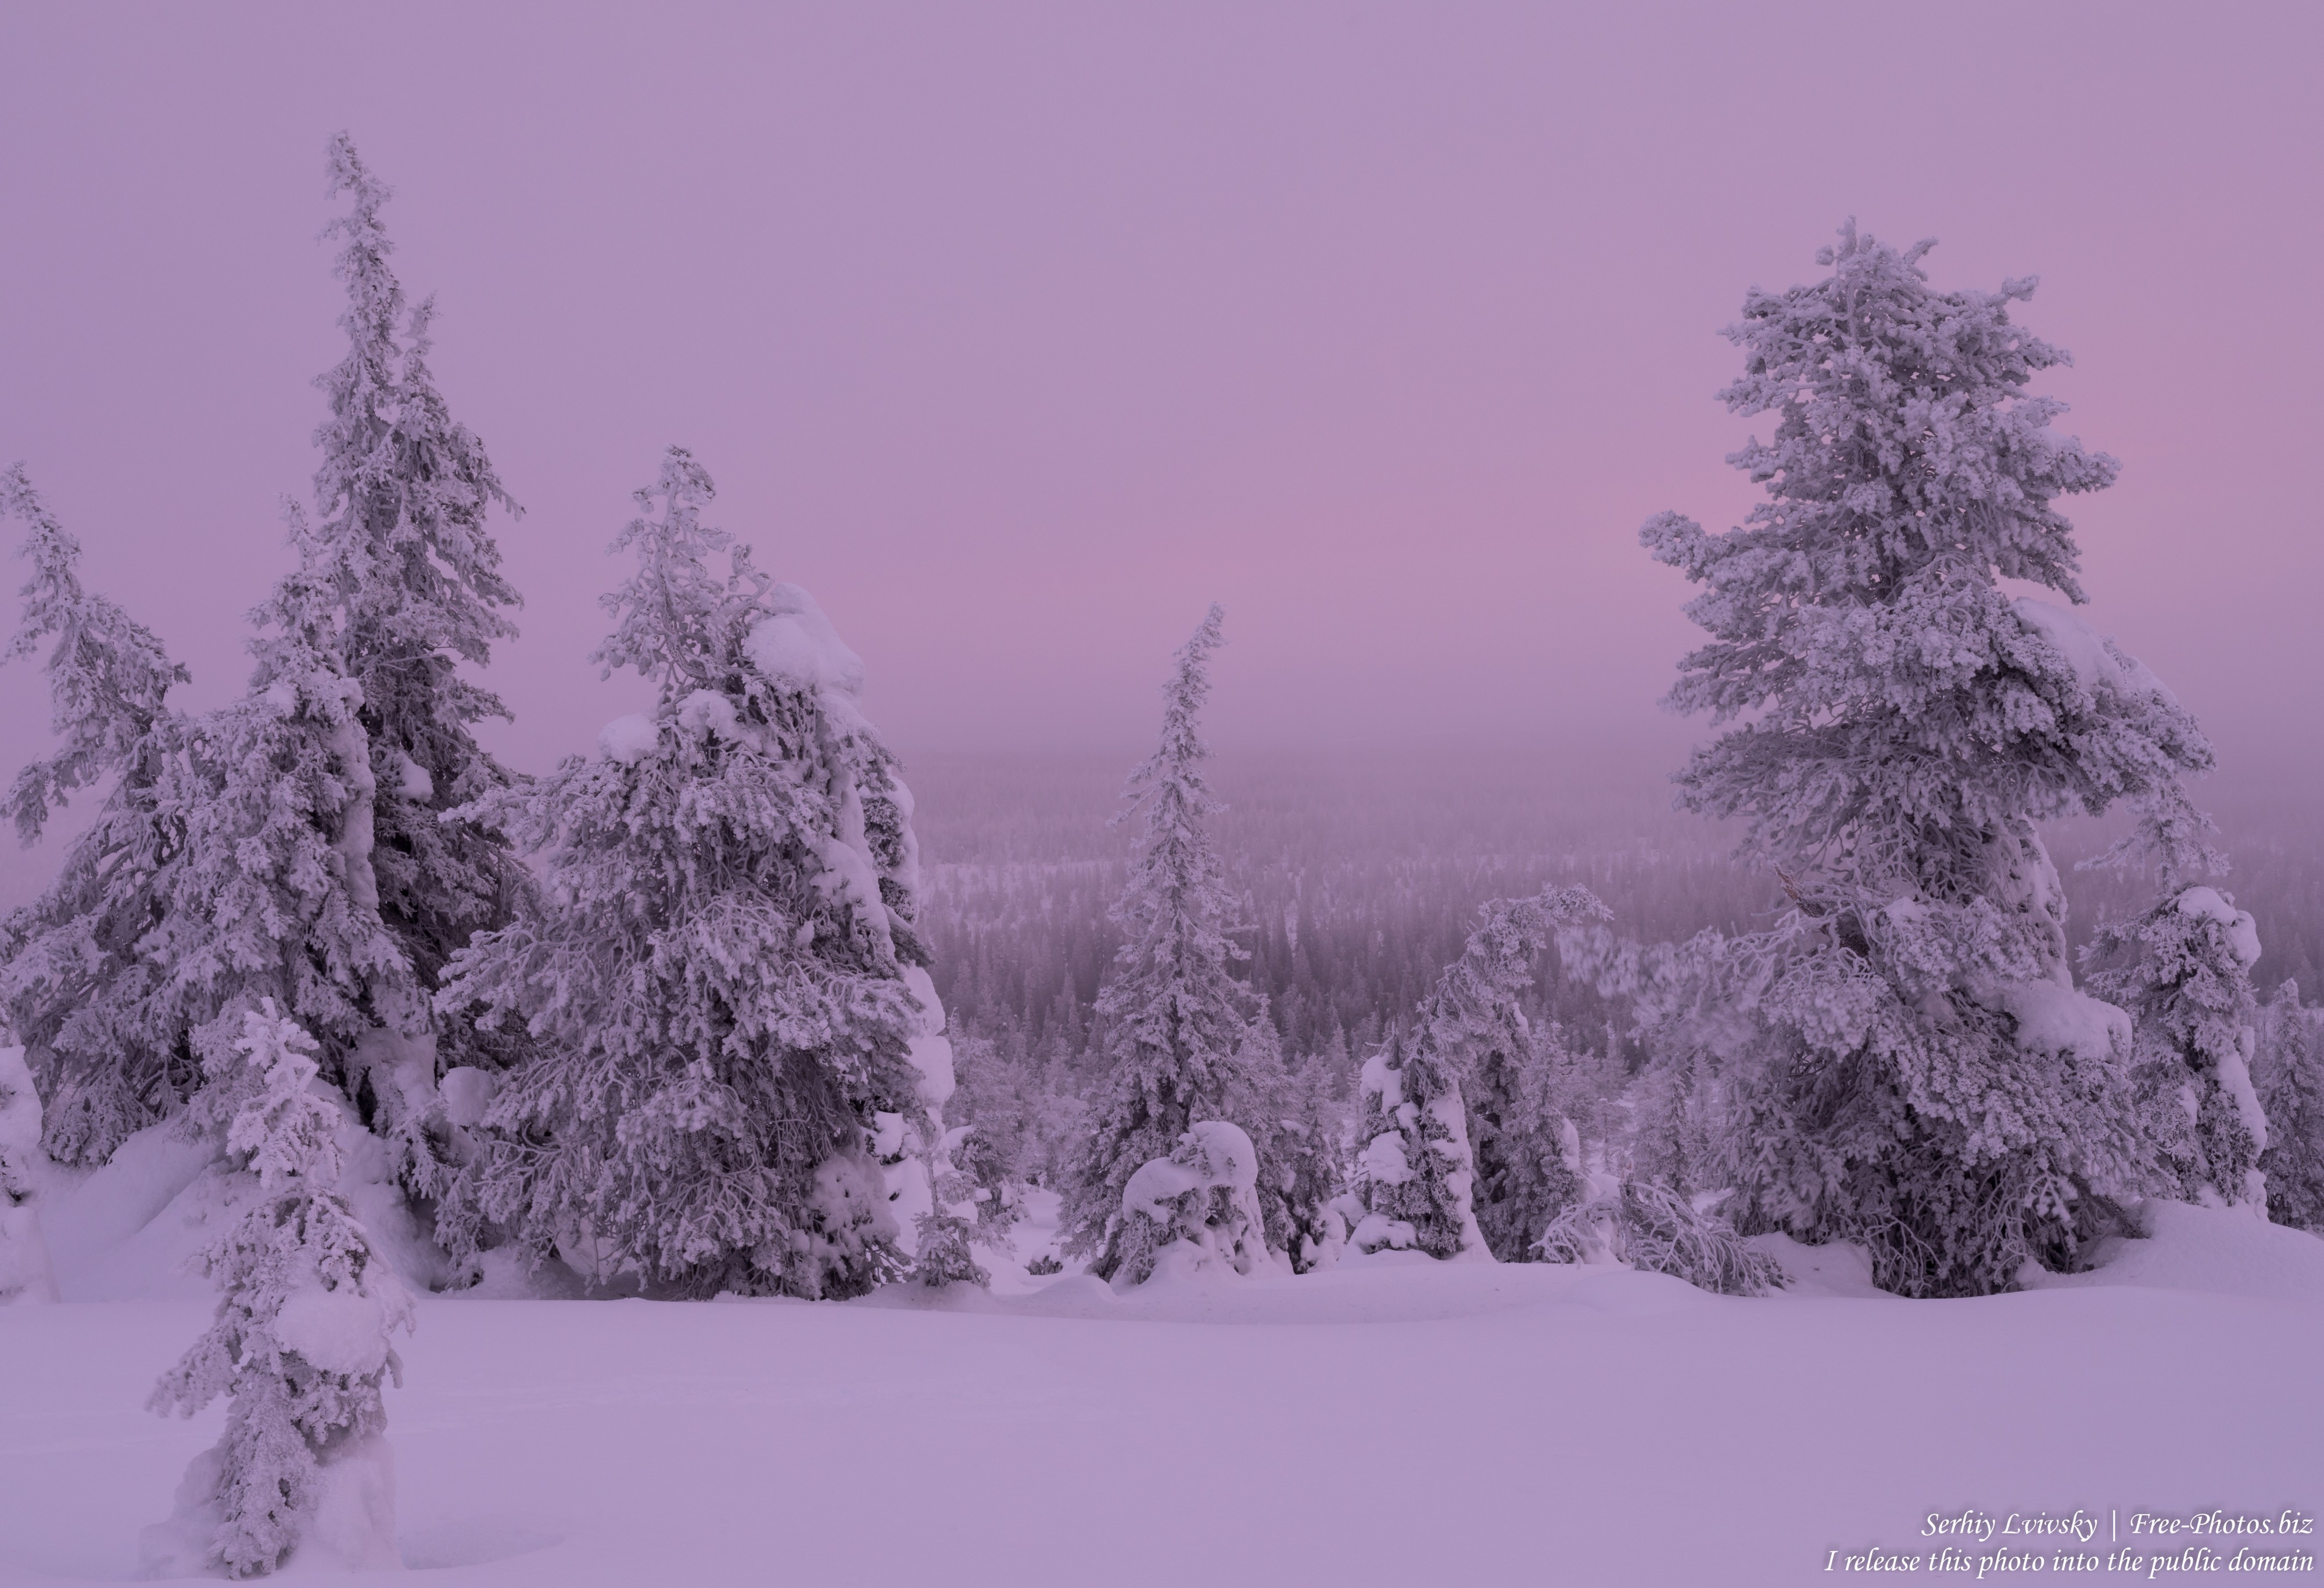 Riisitunturi, Finland, photographed in January 2020 by Serhiy Lvivsky, picture 12